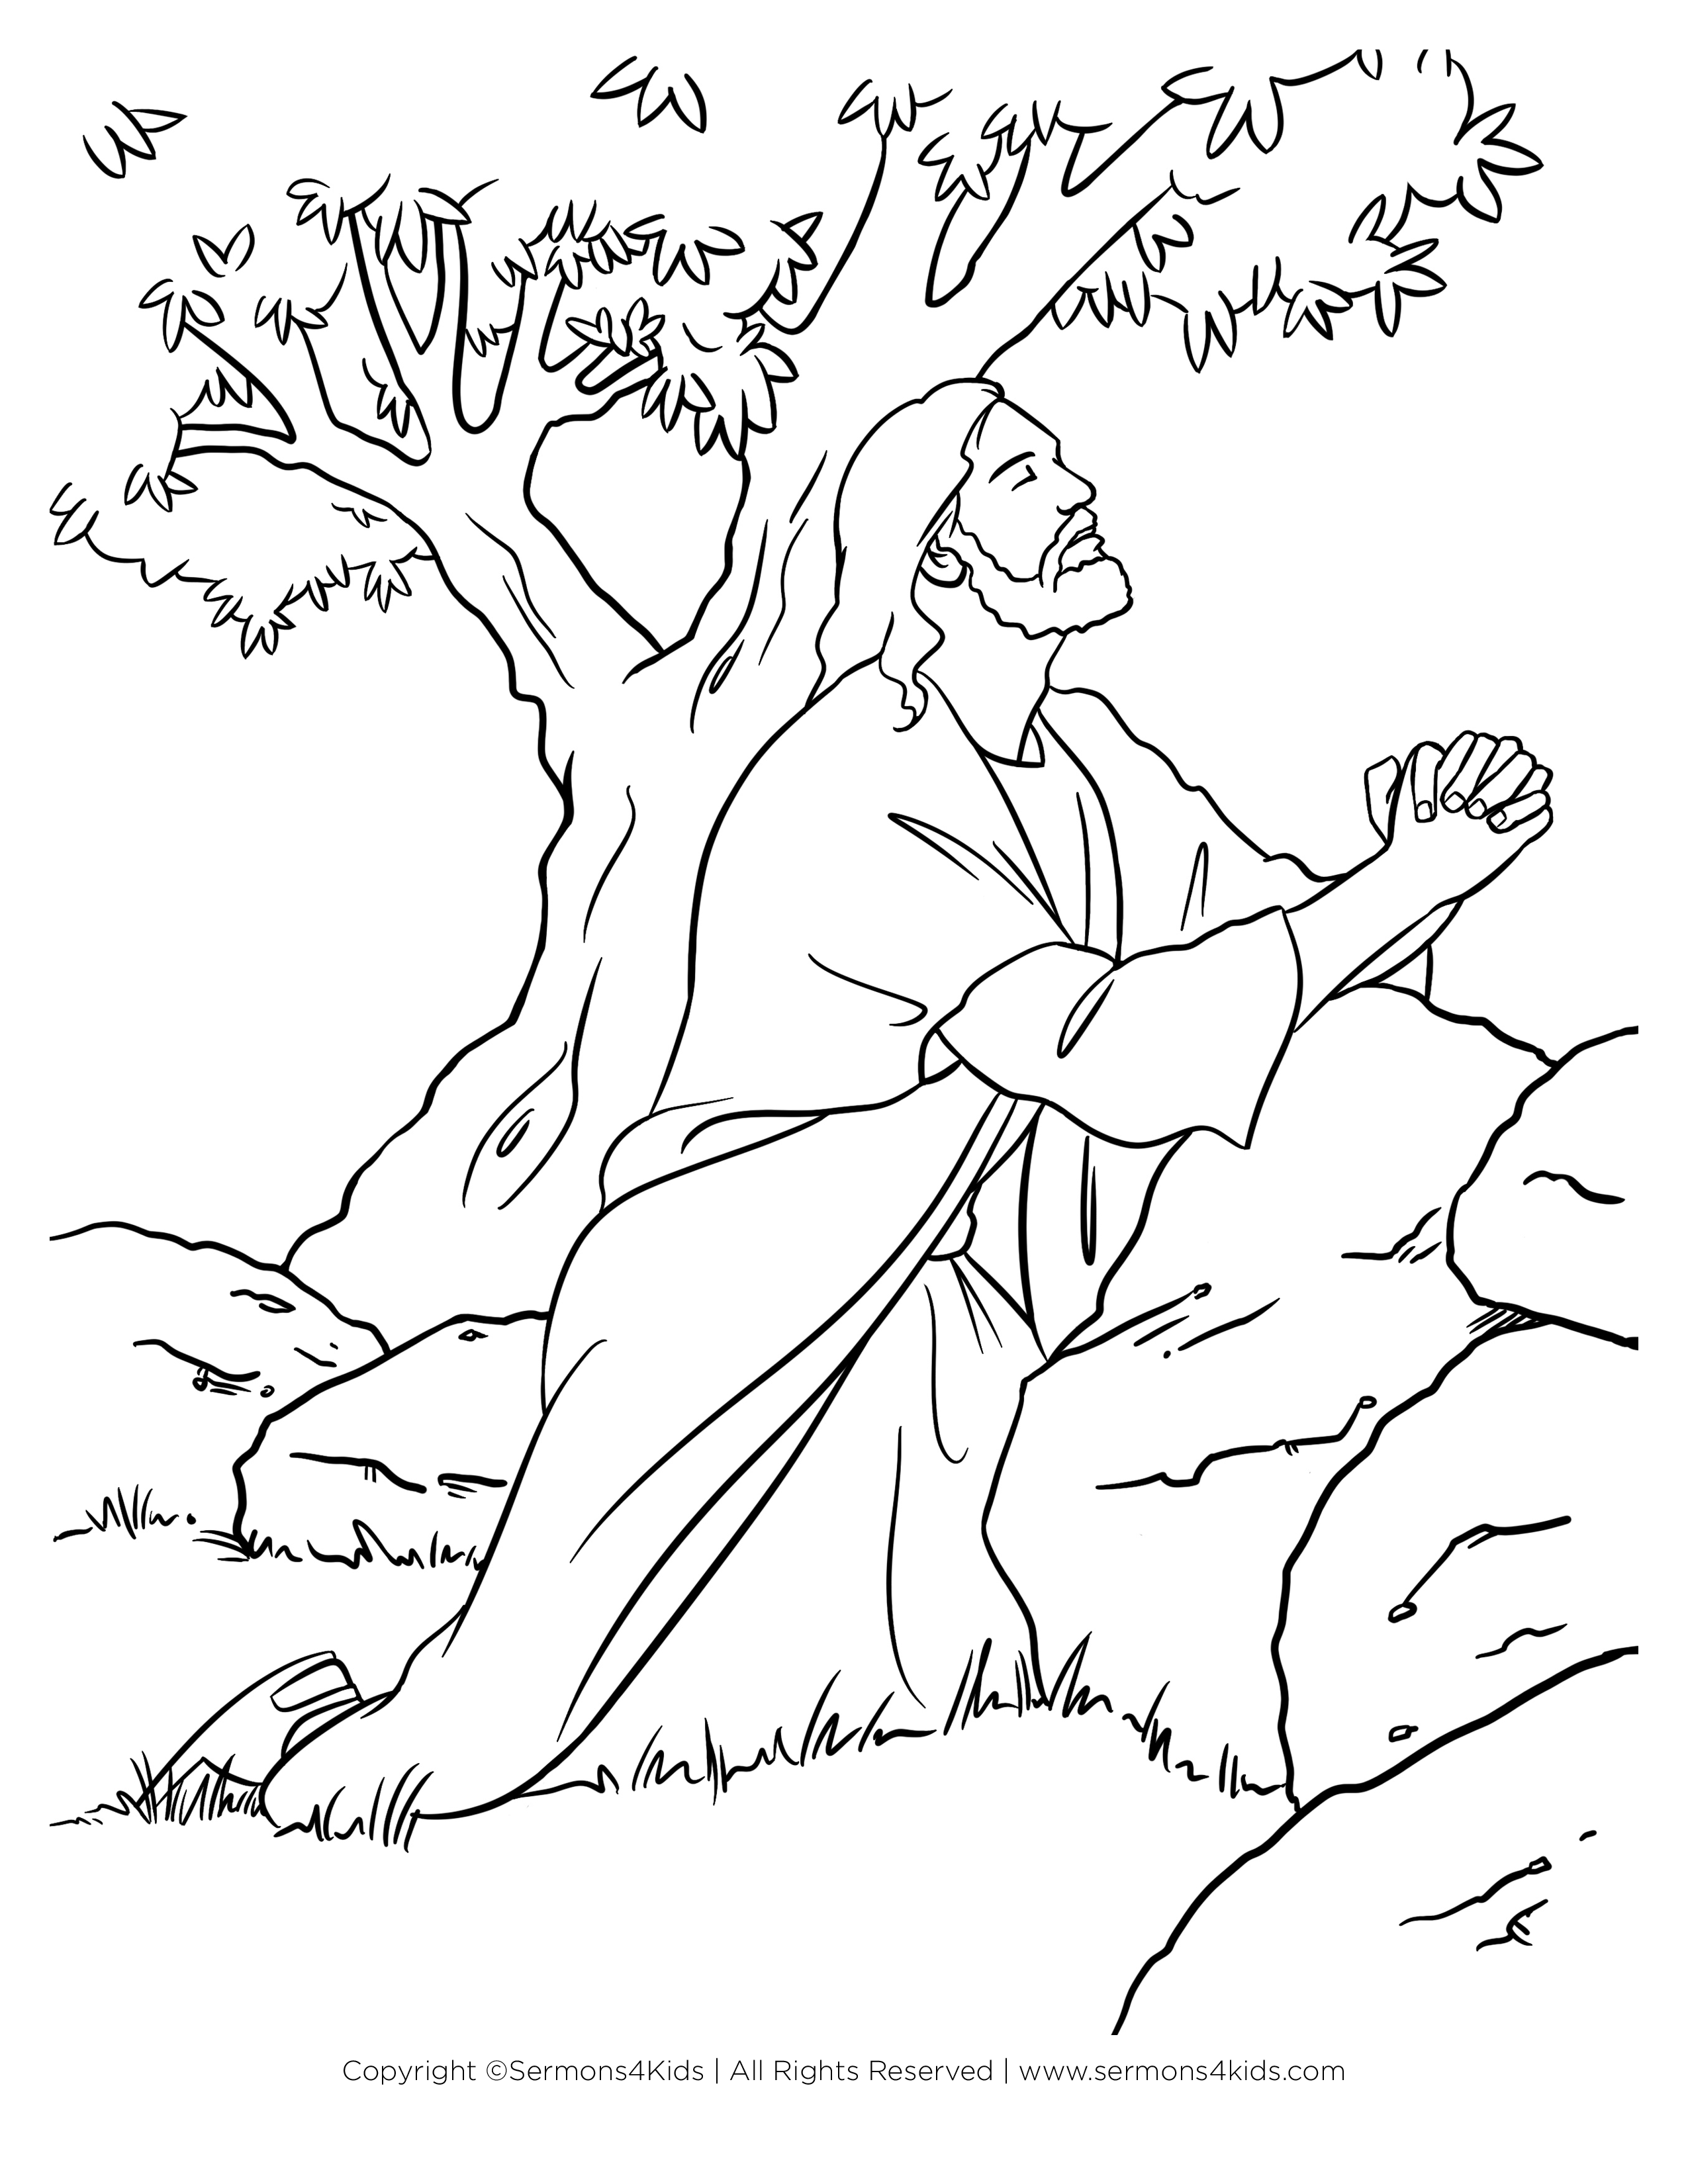 Jesus Prays for His Disciples | Children's Coloring Page from Sermons4...